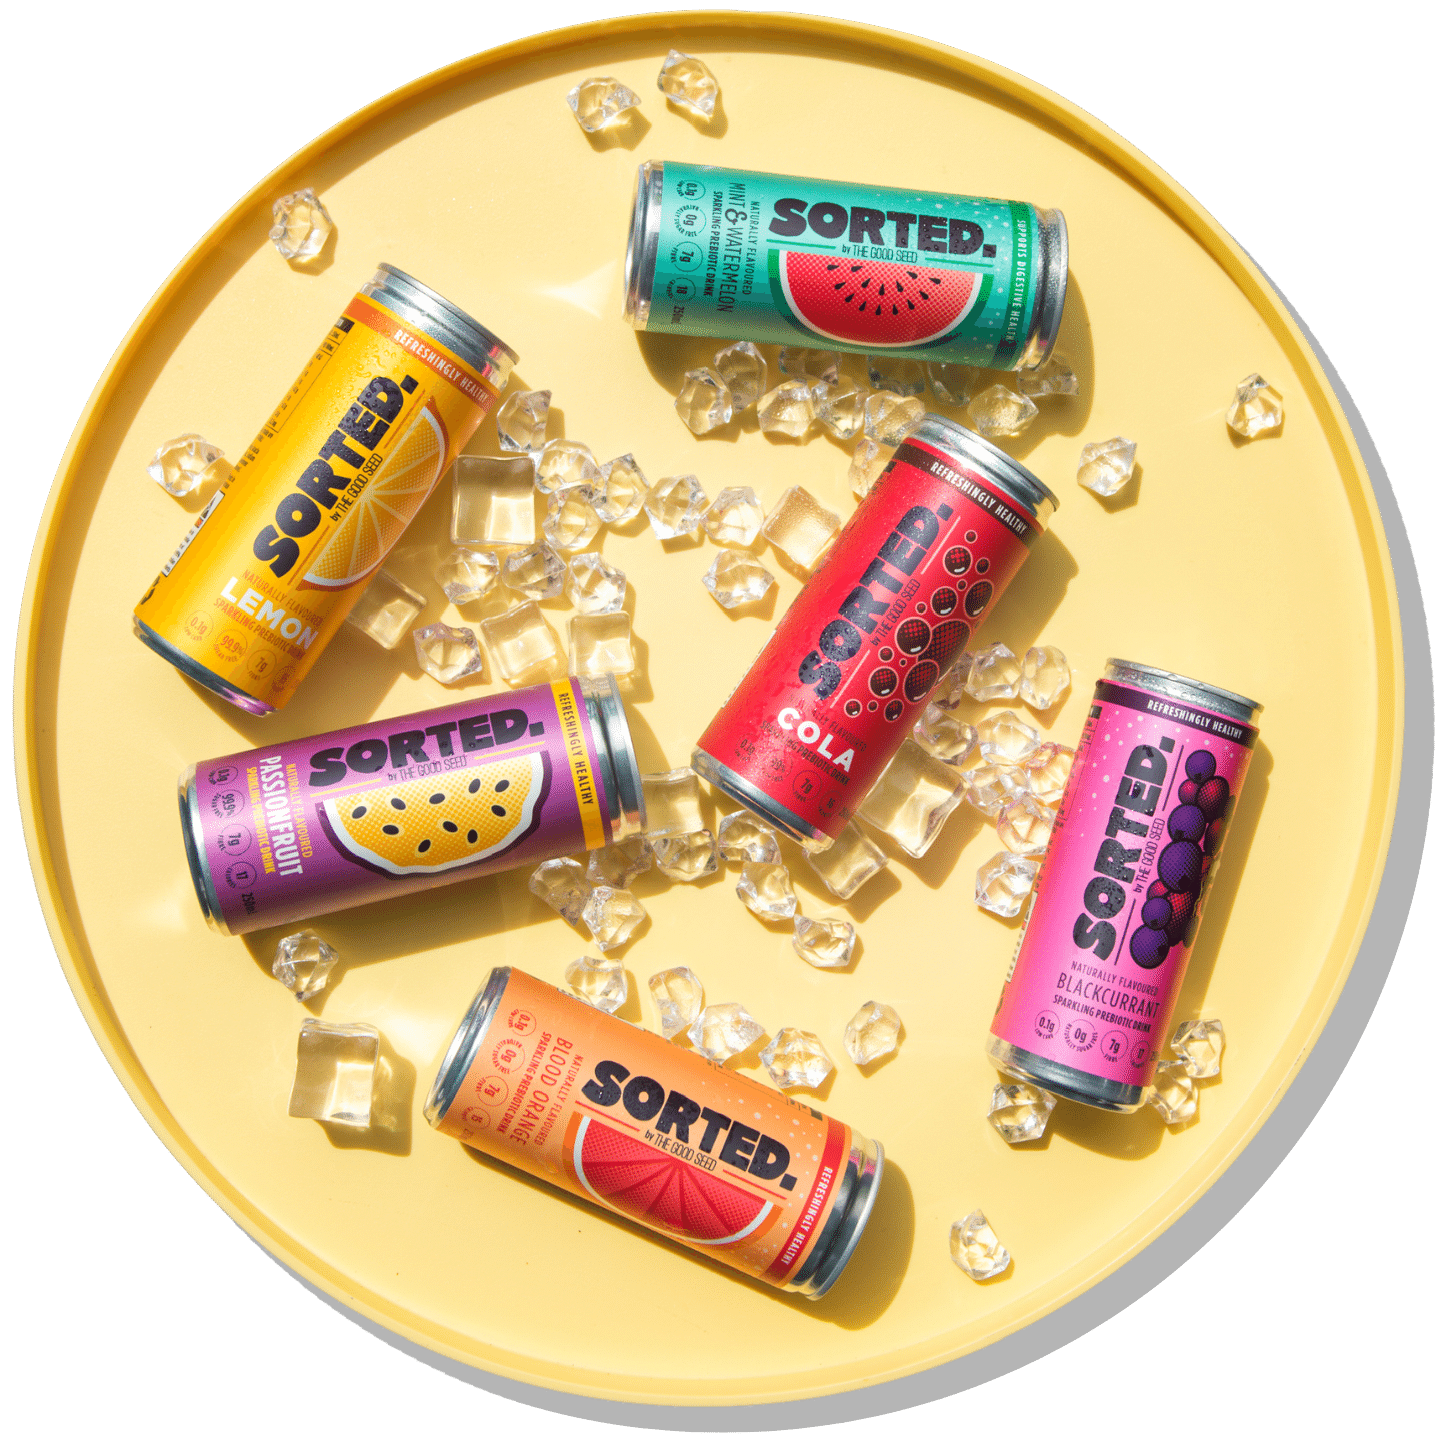 sorted prebiotic soft drink cans on a tray